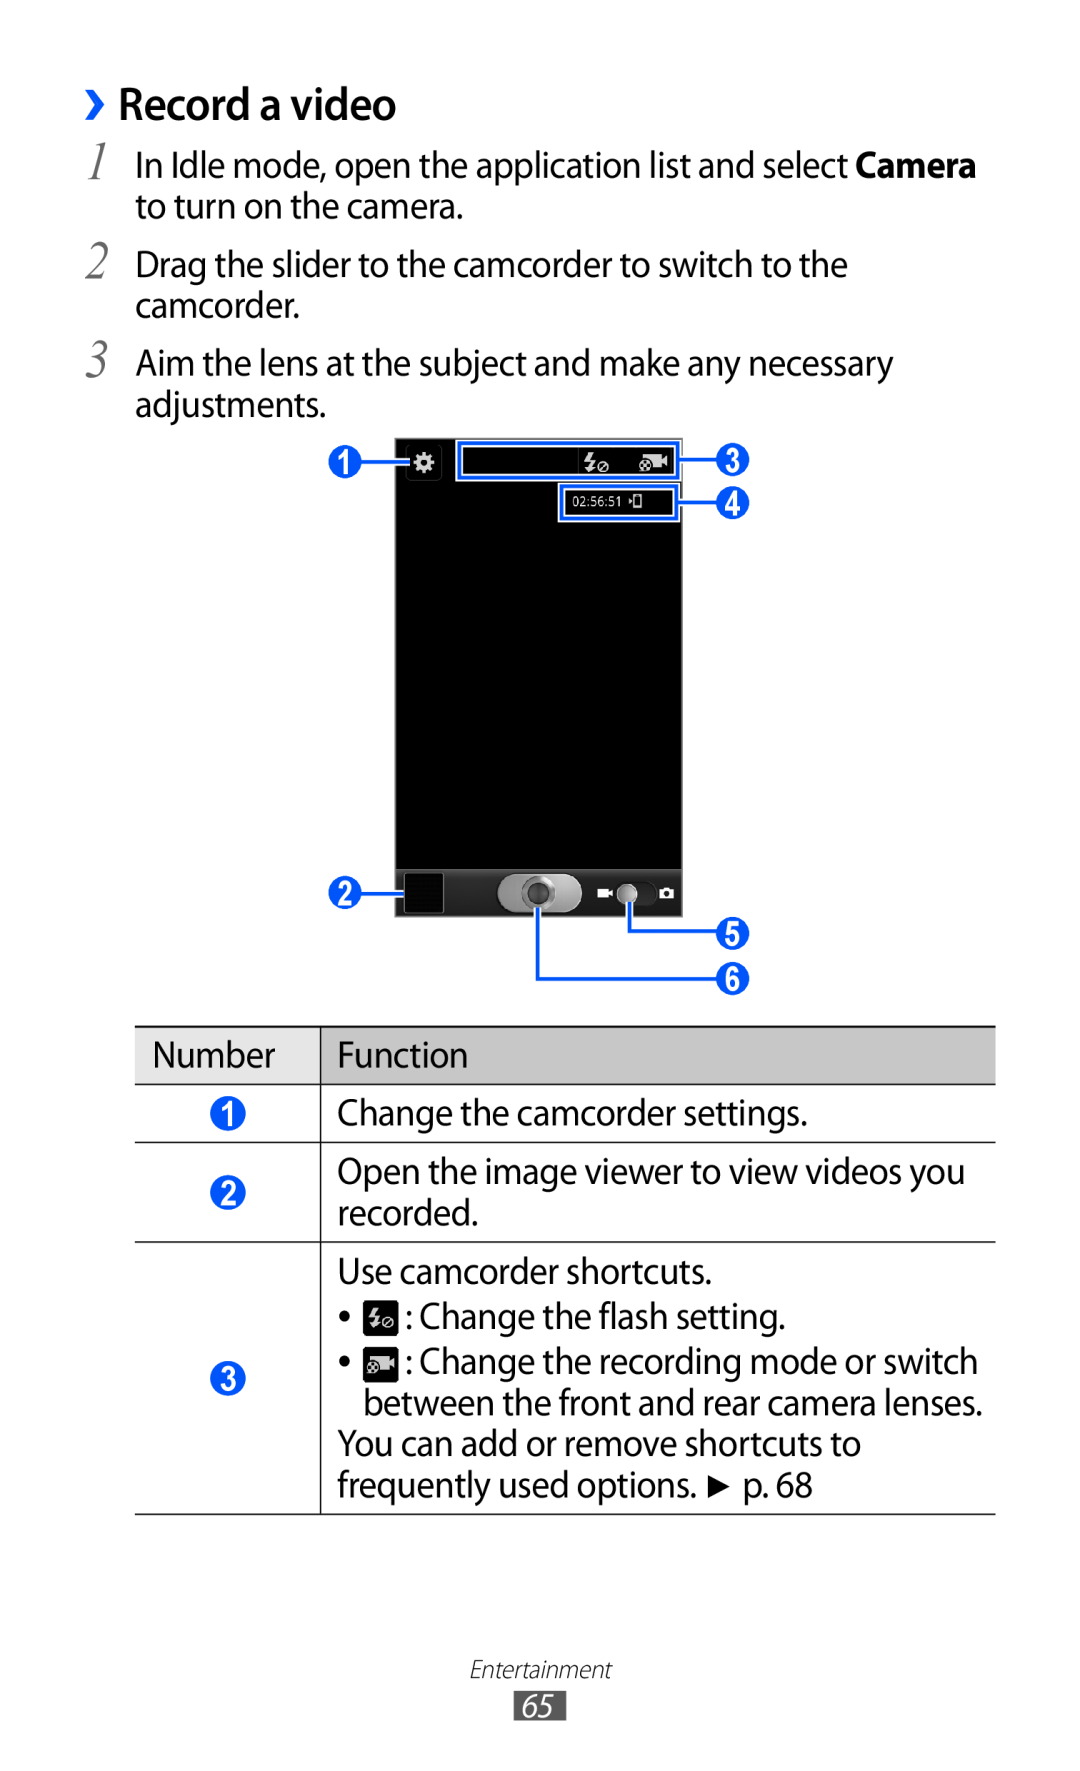 Samsung GT-I9070 user manual ››Record a video, between the front and rear camera lenses 